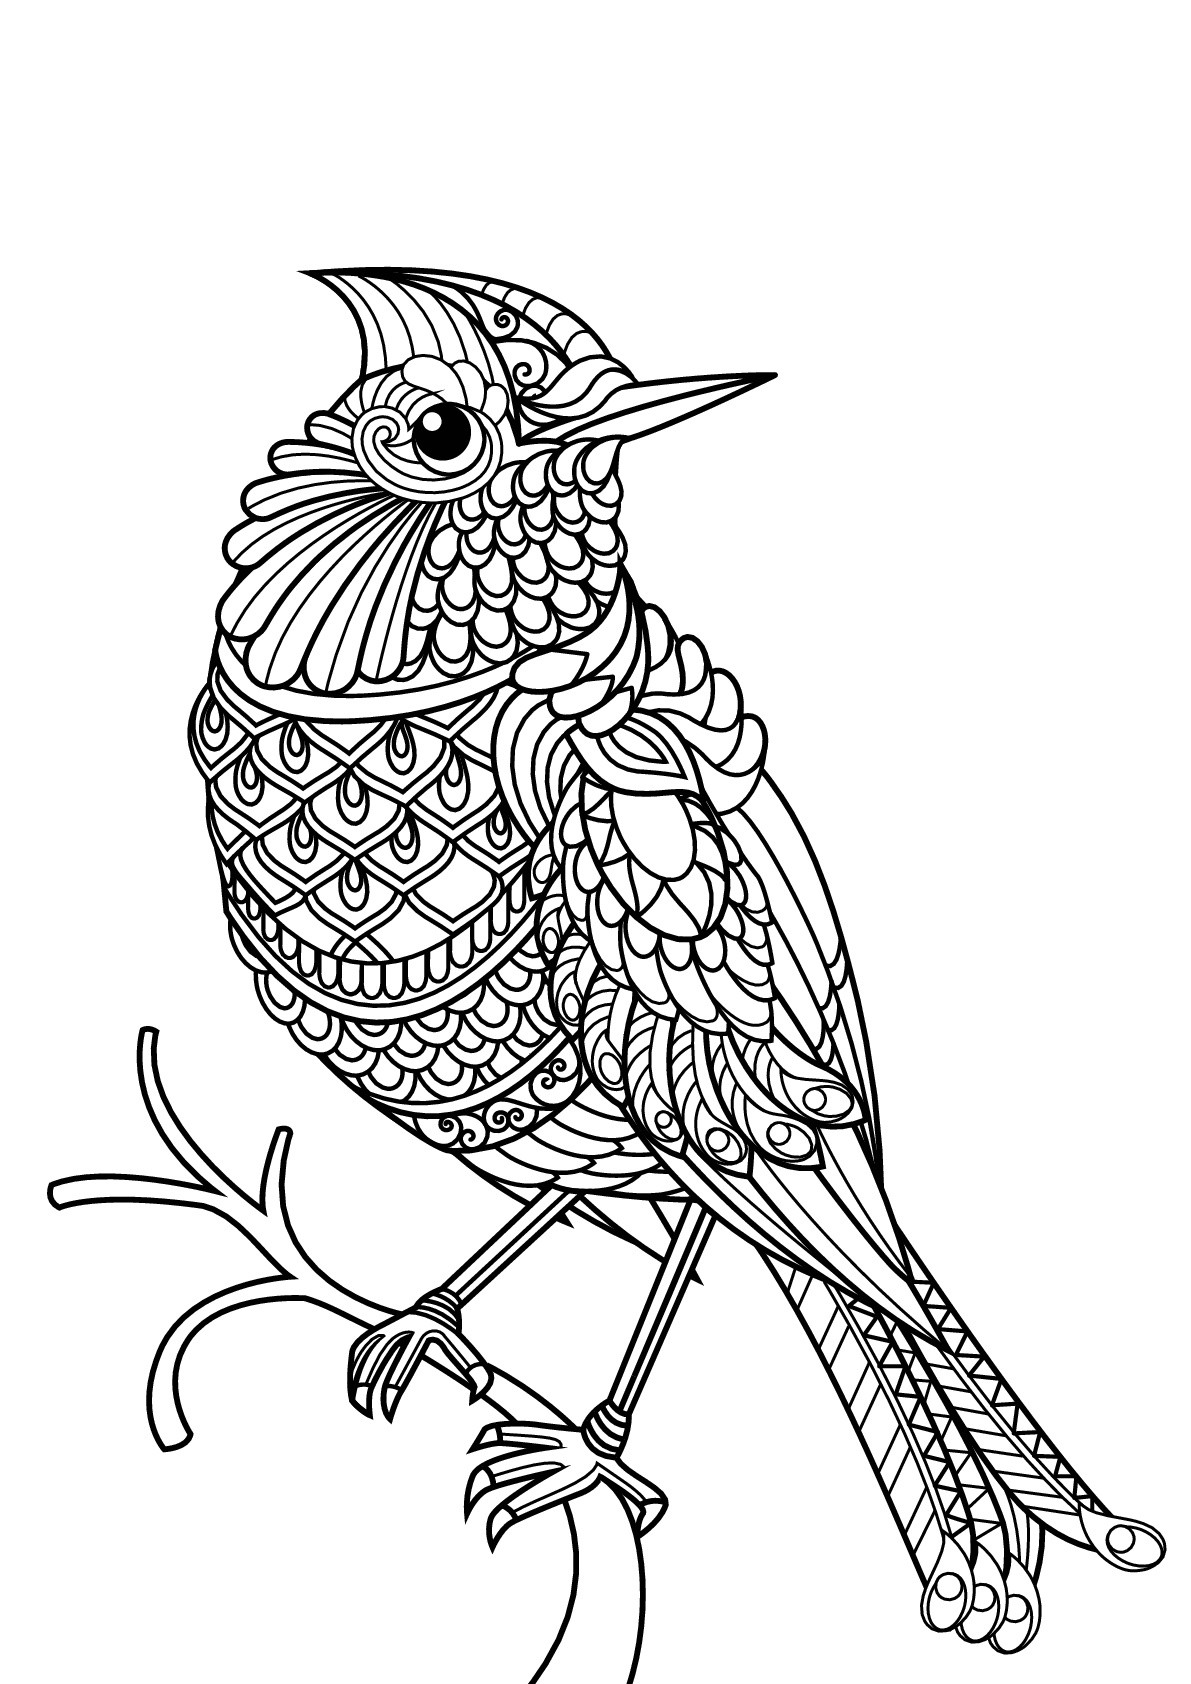 Bird Coloring Book For Adults
 Free book bird Birds Adult Coloring Pages